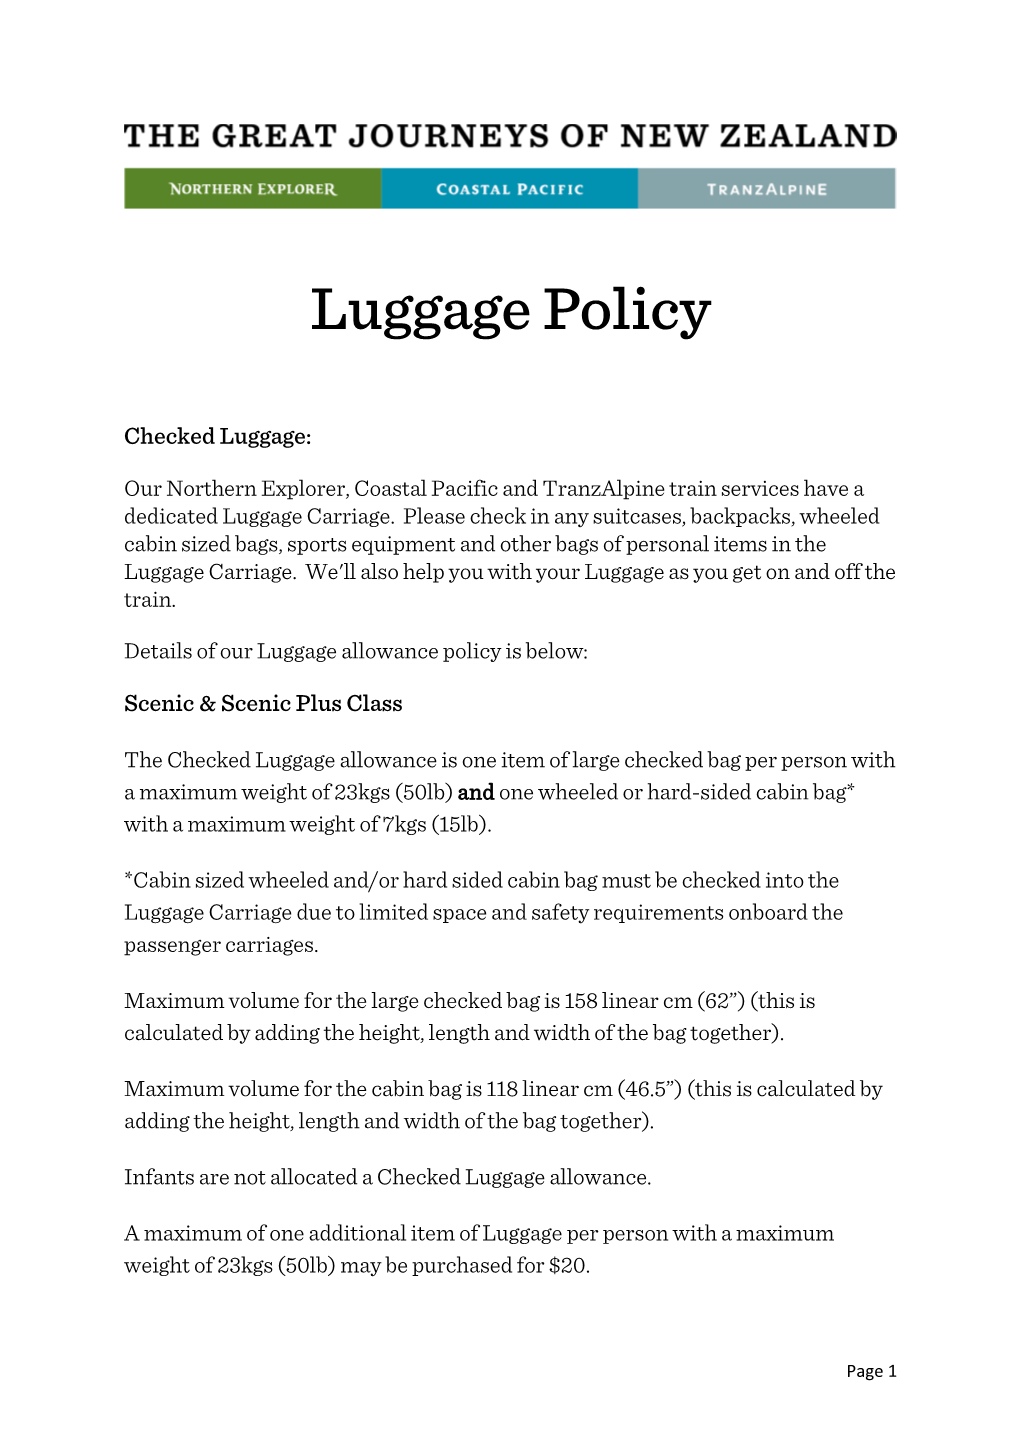 Luggage Policy